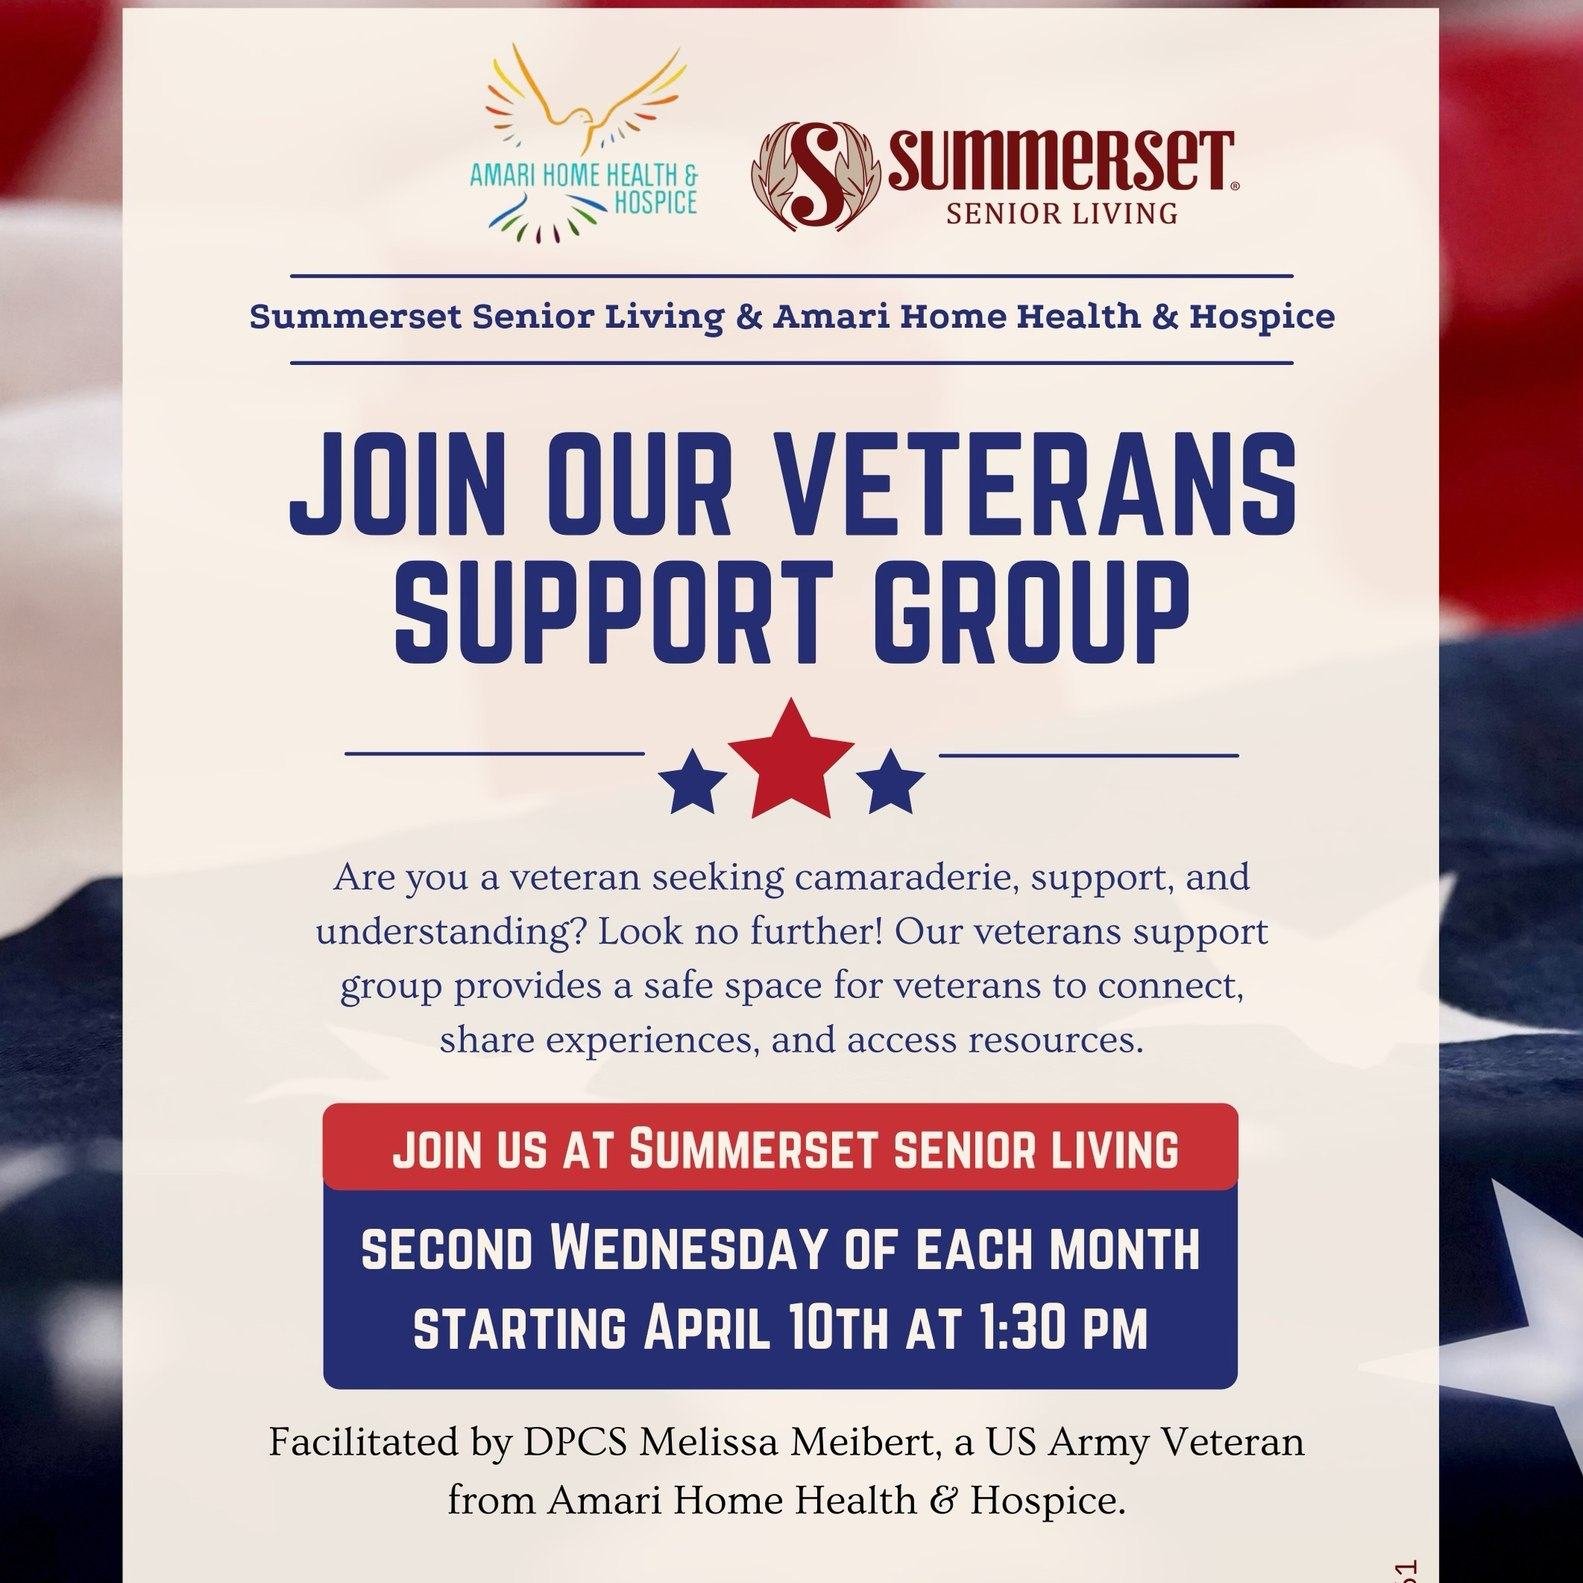 🎖️ Calling all veterans! 🎖️ Tomorrow, Wednesday May 8th, marks our next gathering for the Veteran's Support Group at Summerset Senior Living. 🗓️ Join us every second Wednesday of the month for camaraderie, connection, and community.

In our welcom